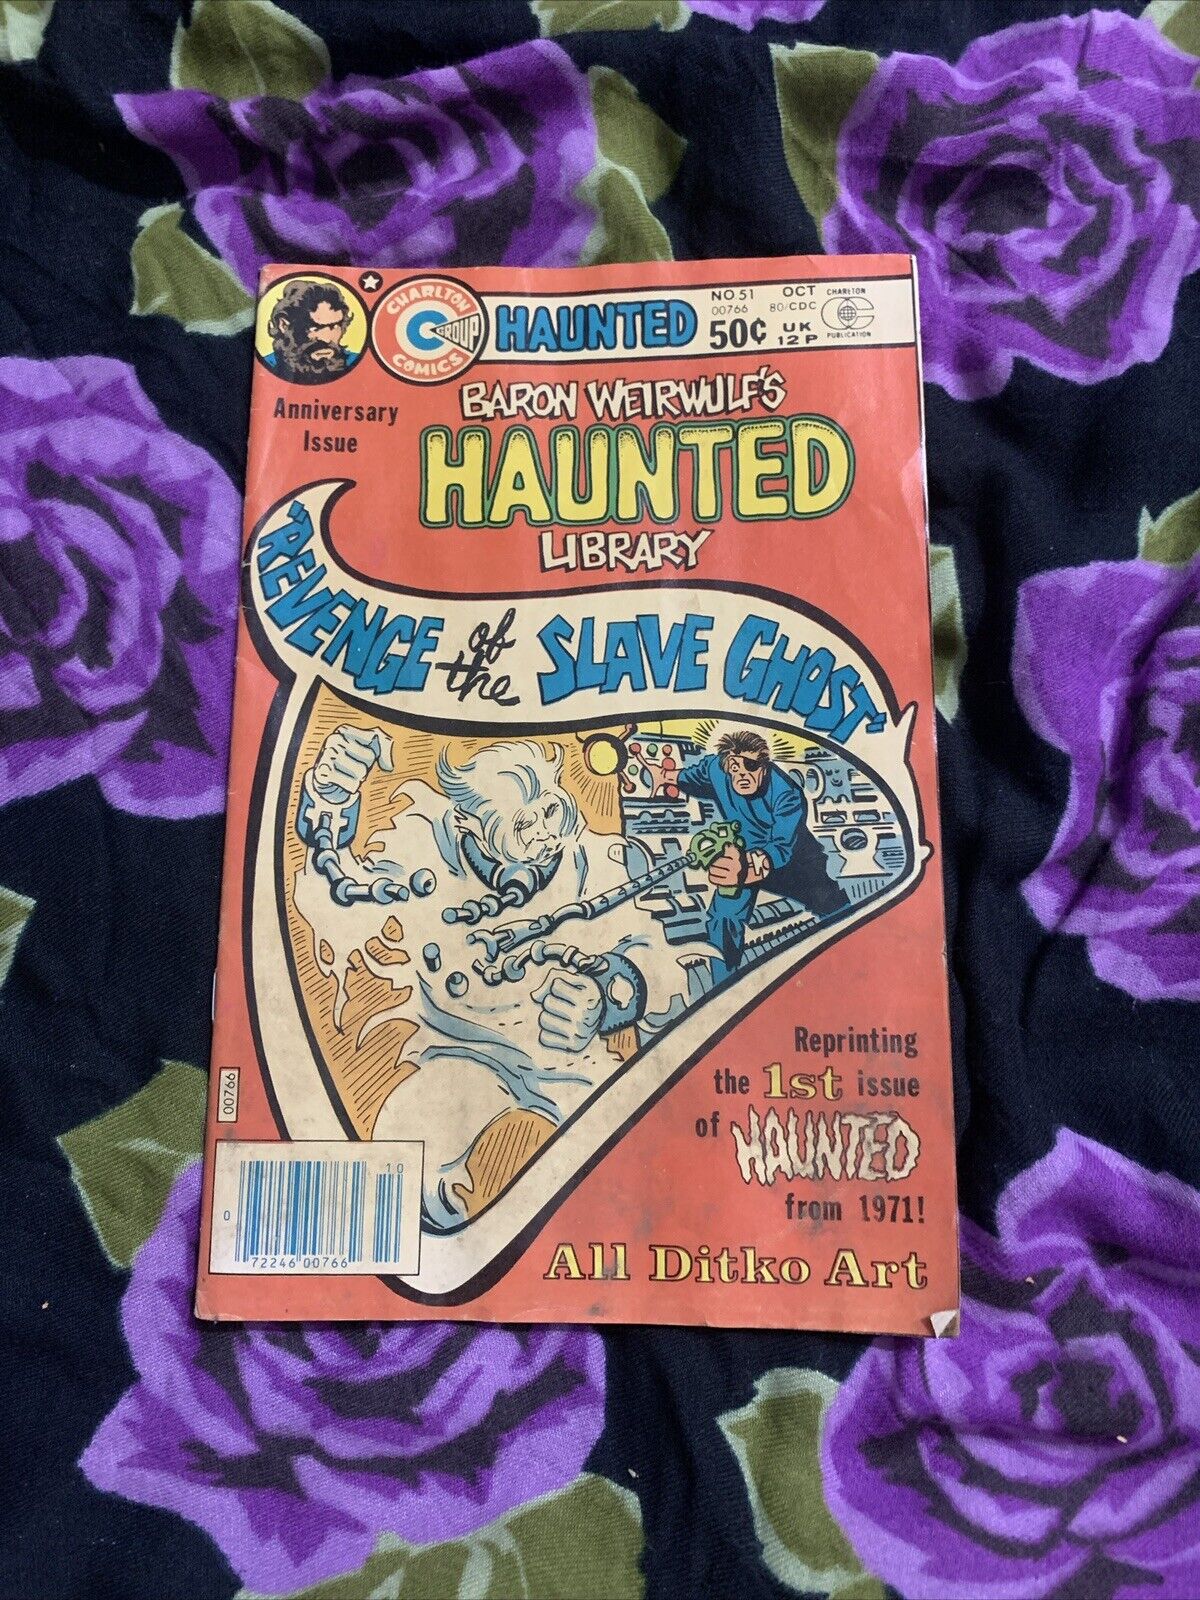 Haunted Library No 51 Oct \'80 Anniversary Issue 1980